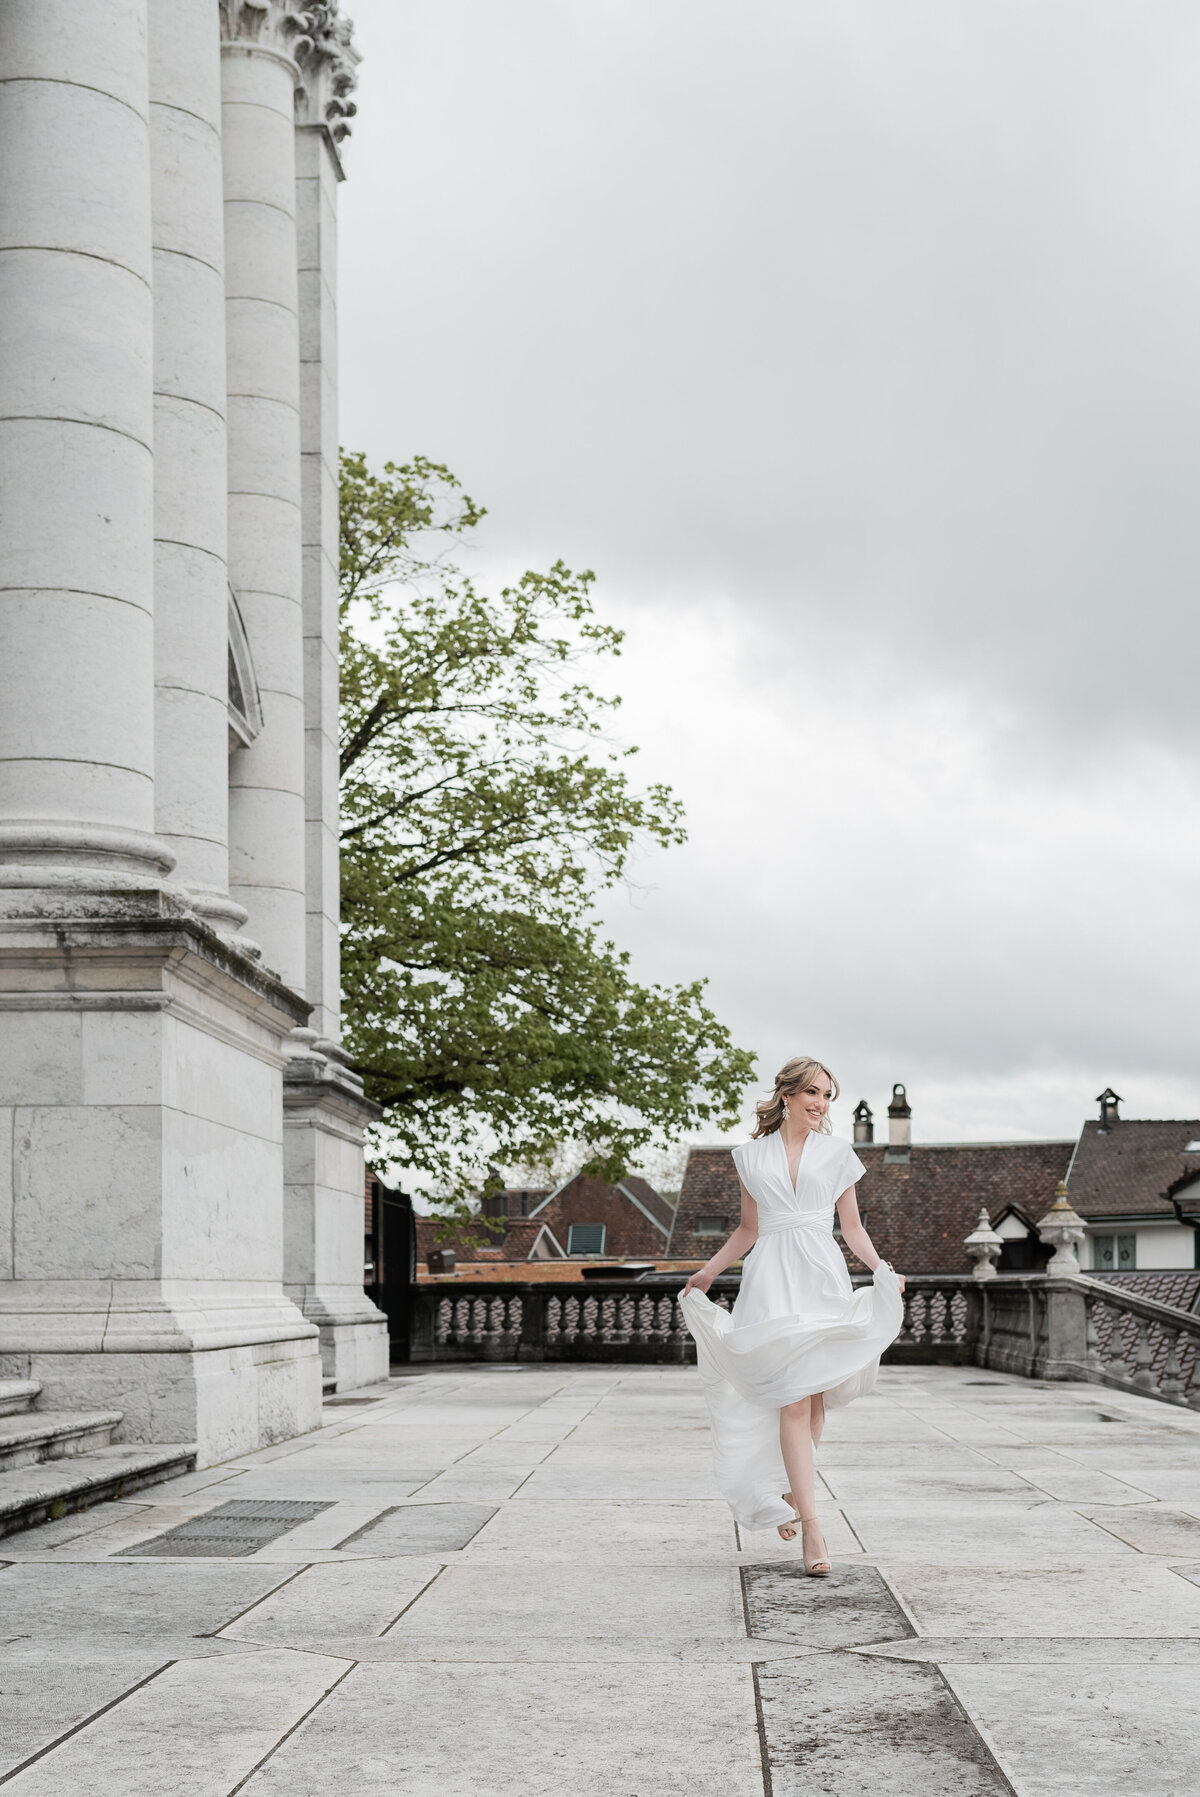 Lisanne Vreeke Photography_Styled Session_Solothurn_16052021-69